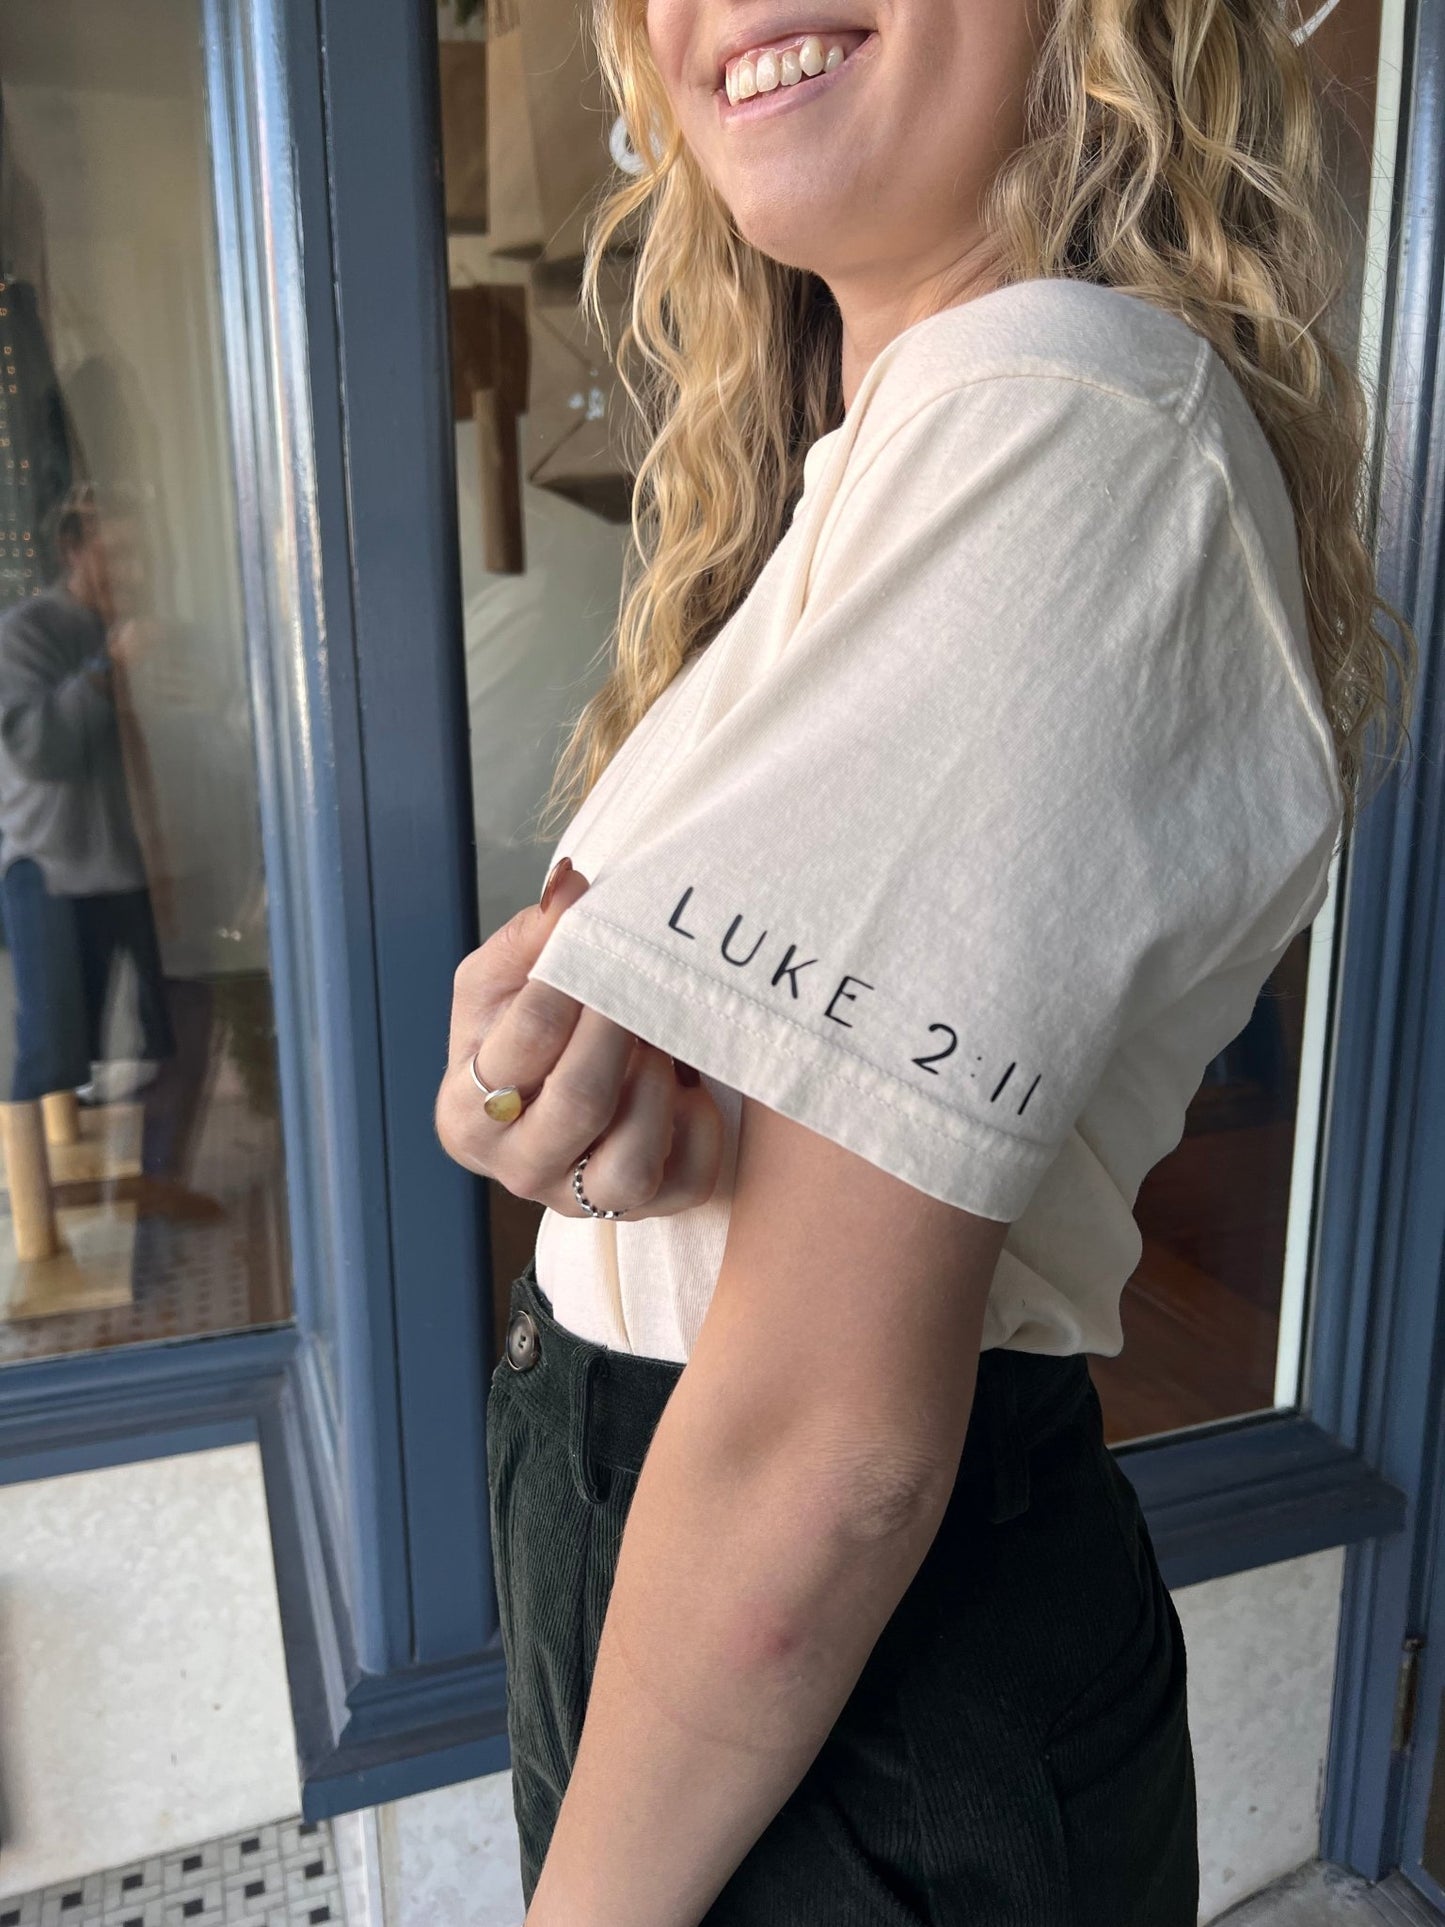 Love Came Down Graphic Tee - The Dragonfly Boutique